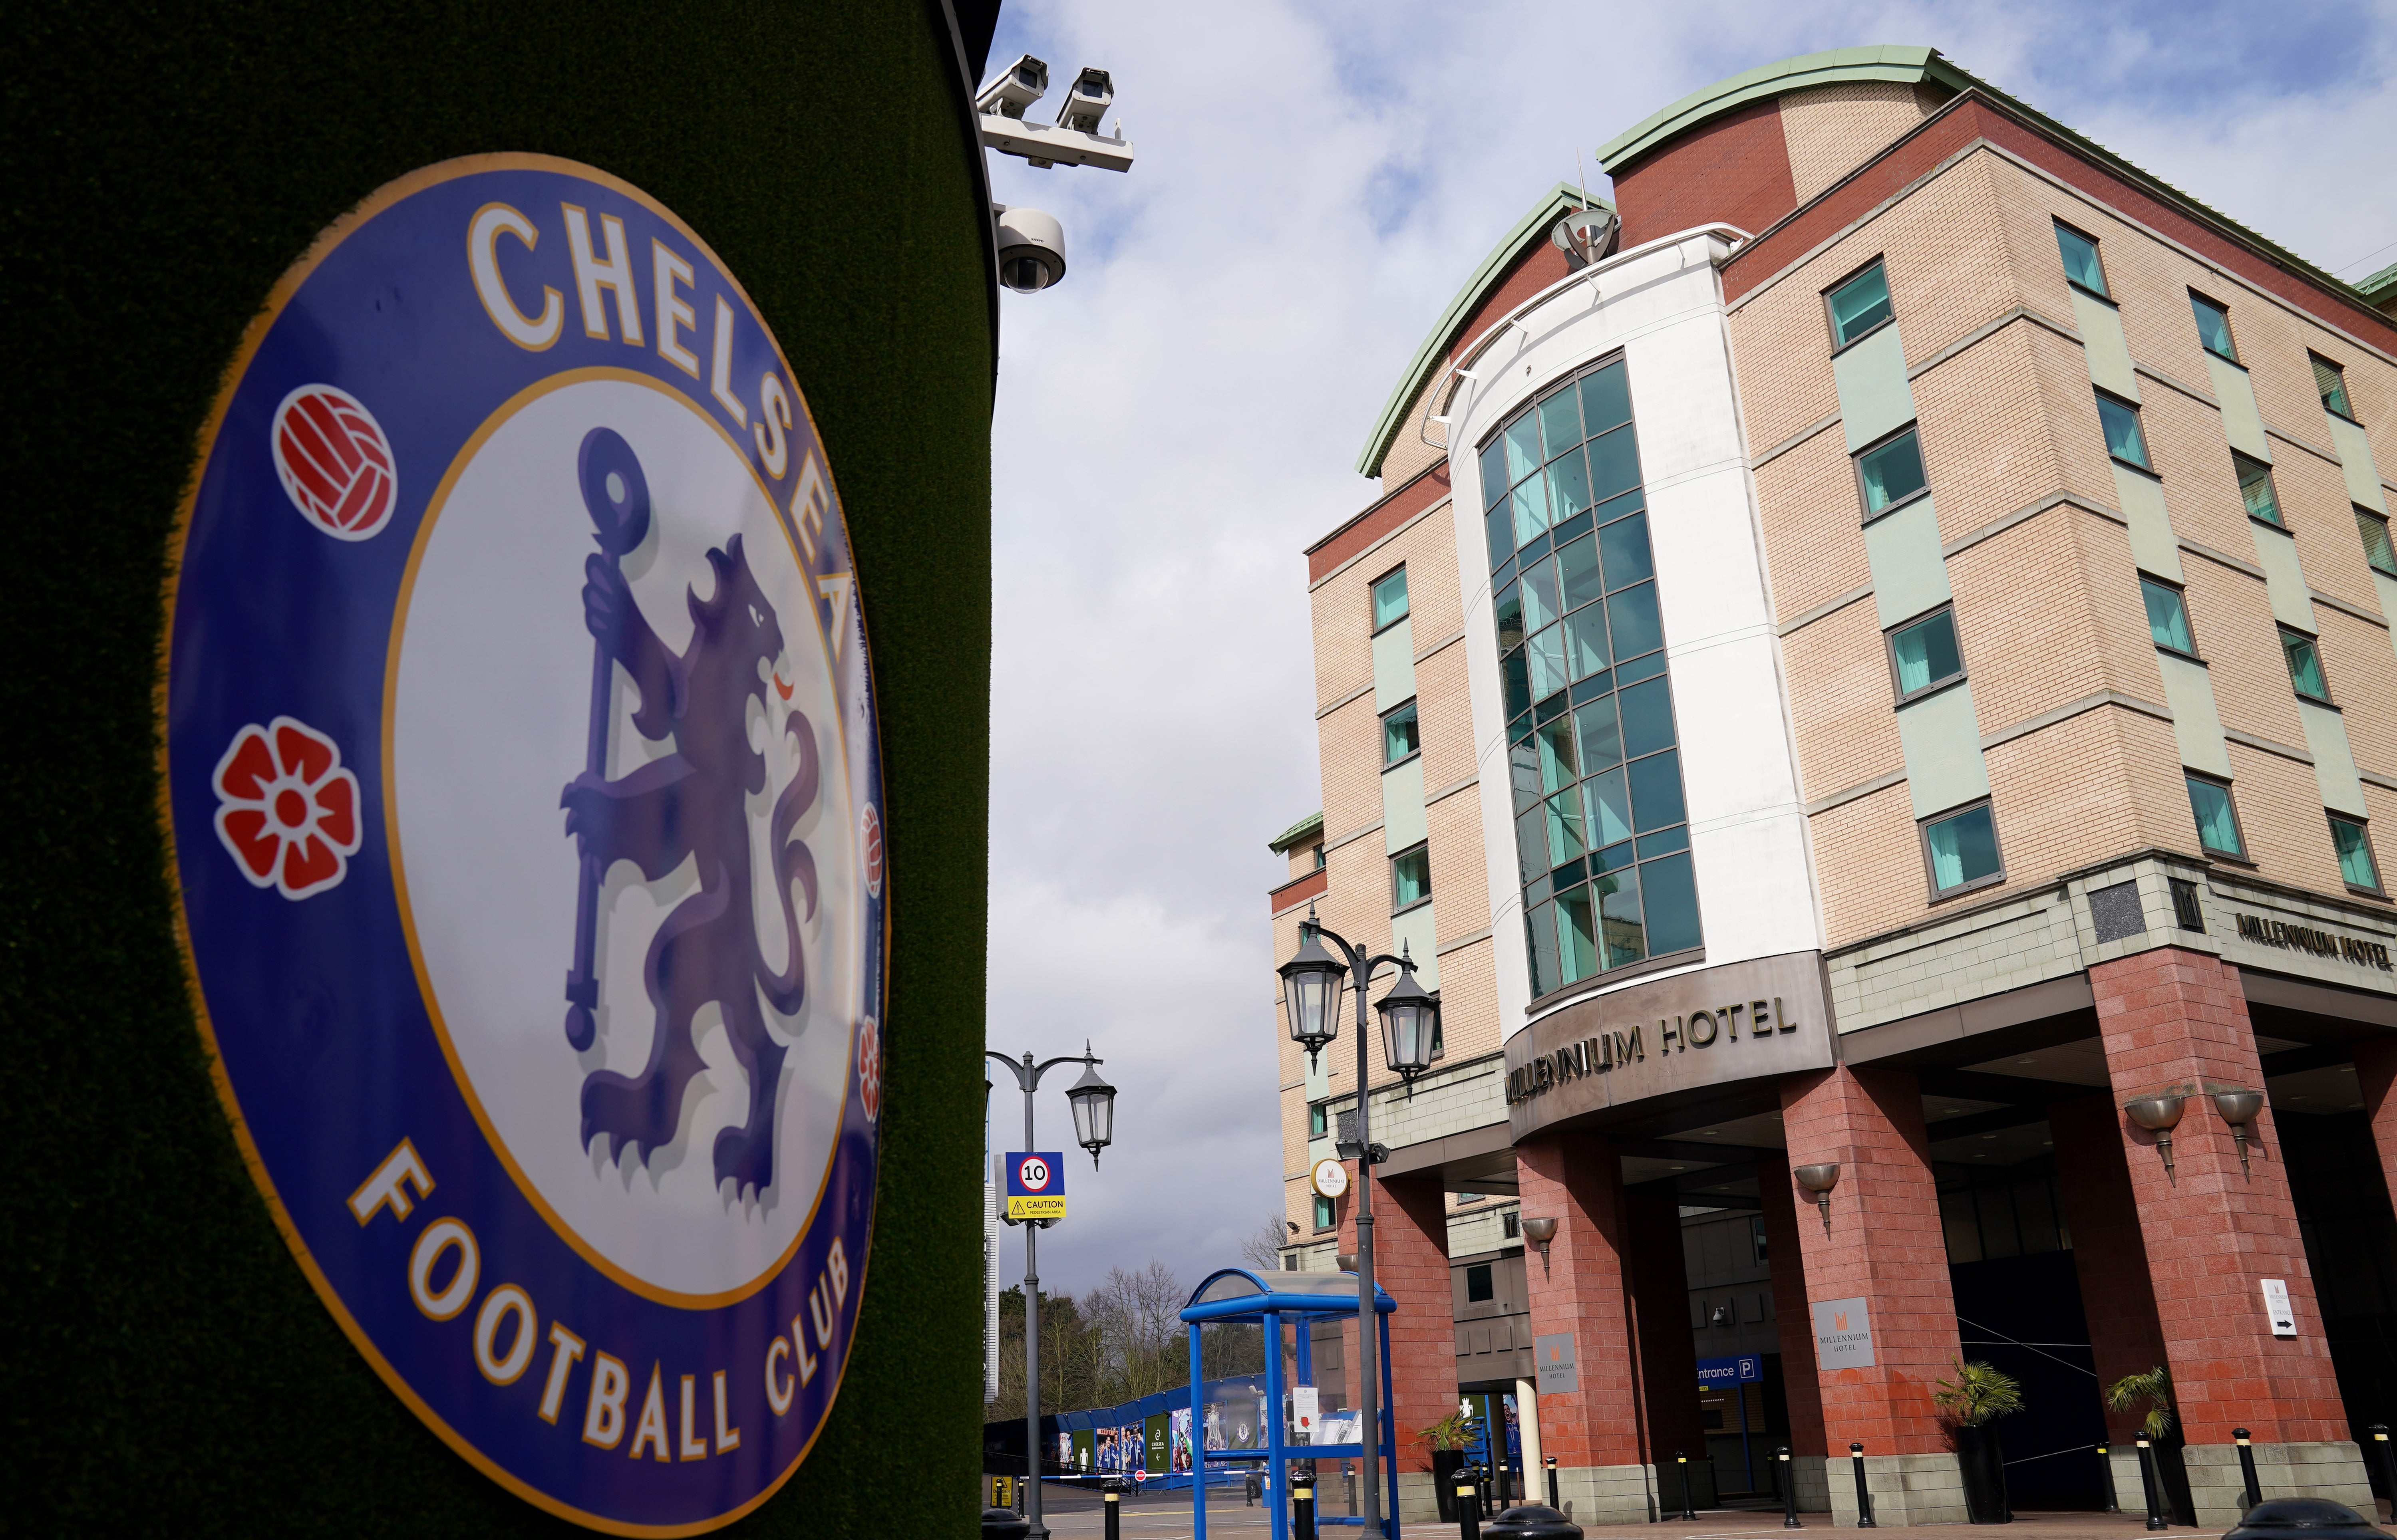 Chelsea FC will be handed a special licence to continue operating (John Walton/PA)